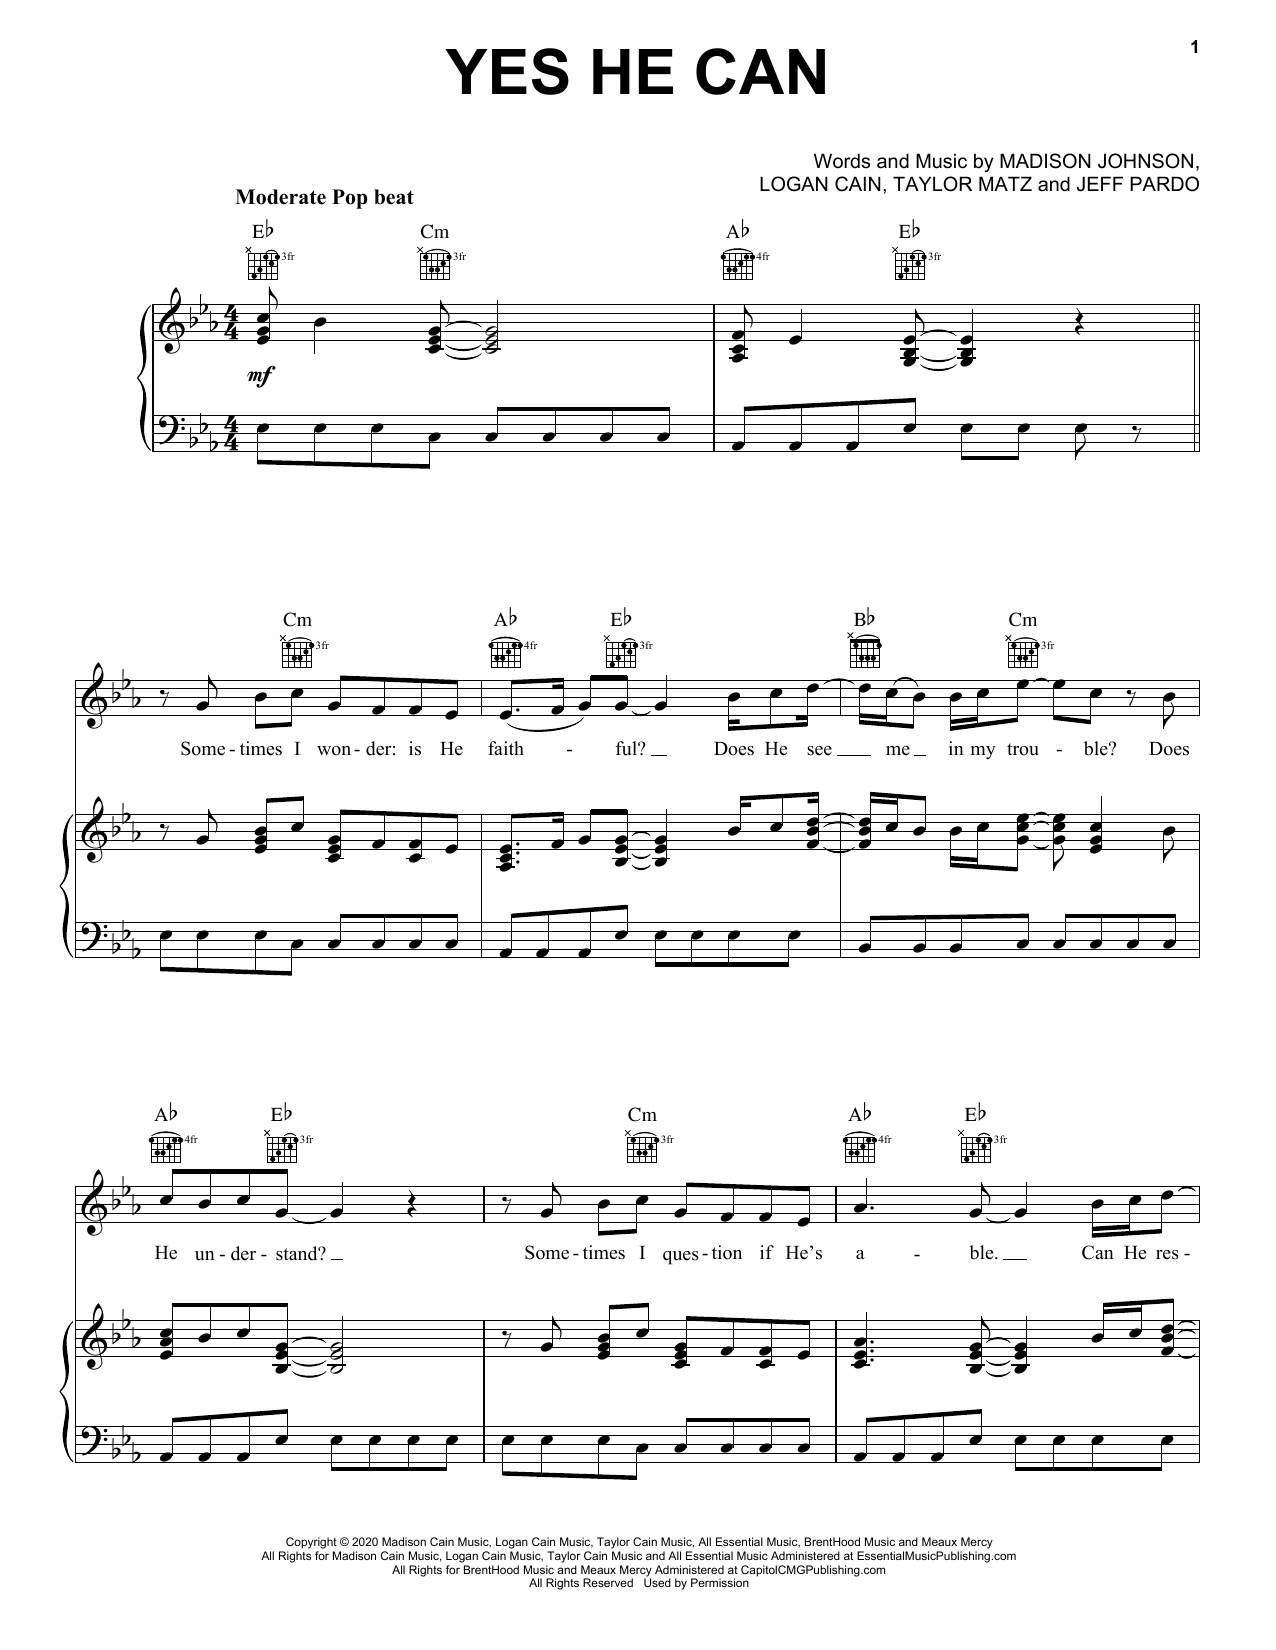 Download CAIN Yes He Can Sheet Music